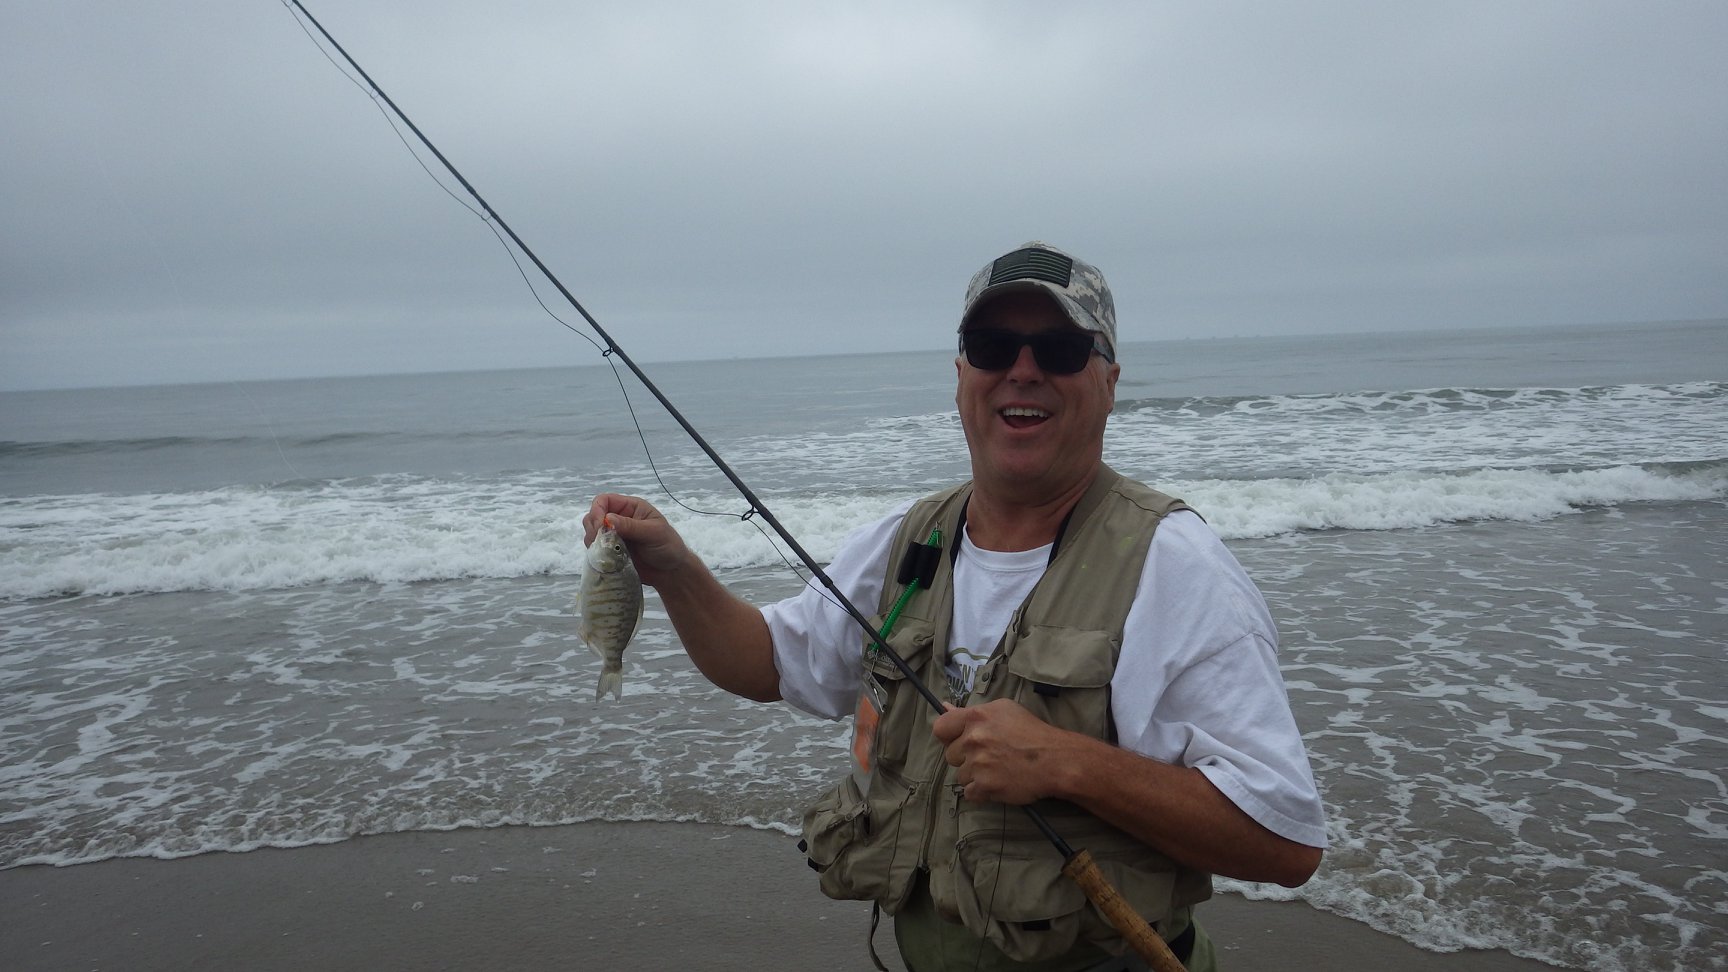 Fly Fish The Surf 7-22-2019 5